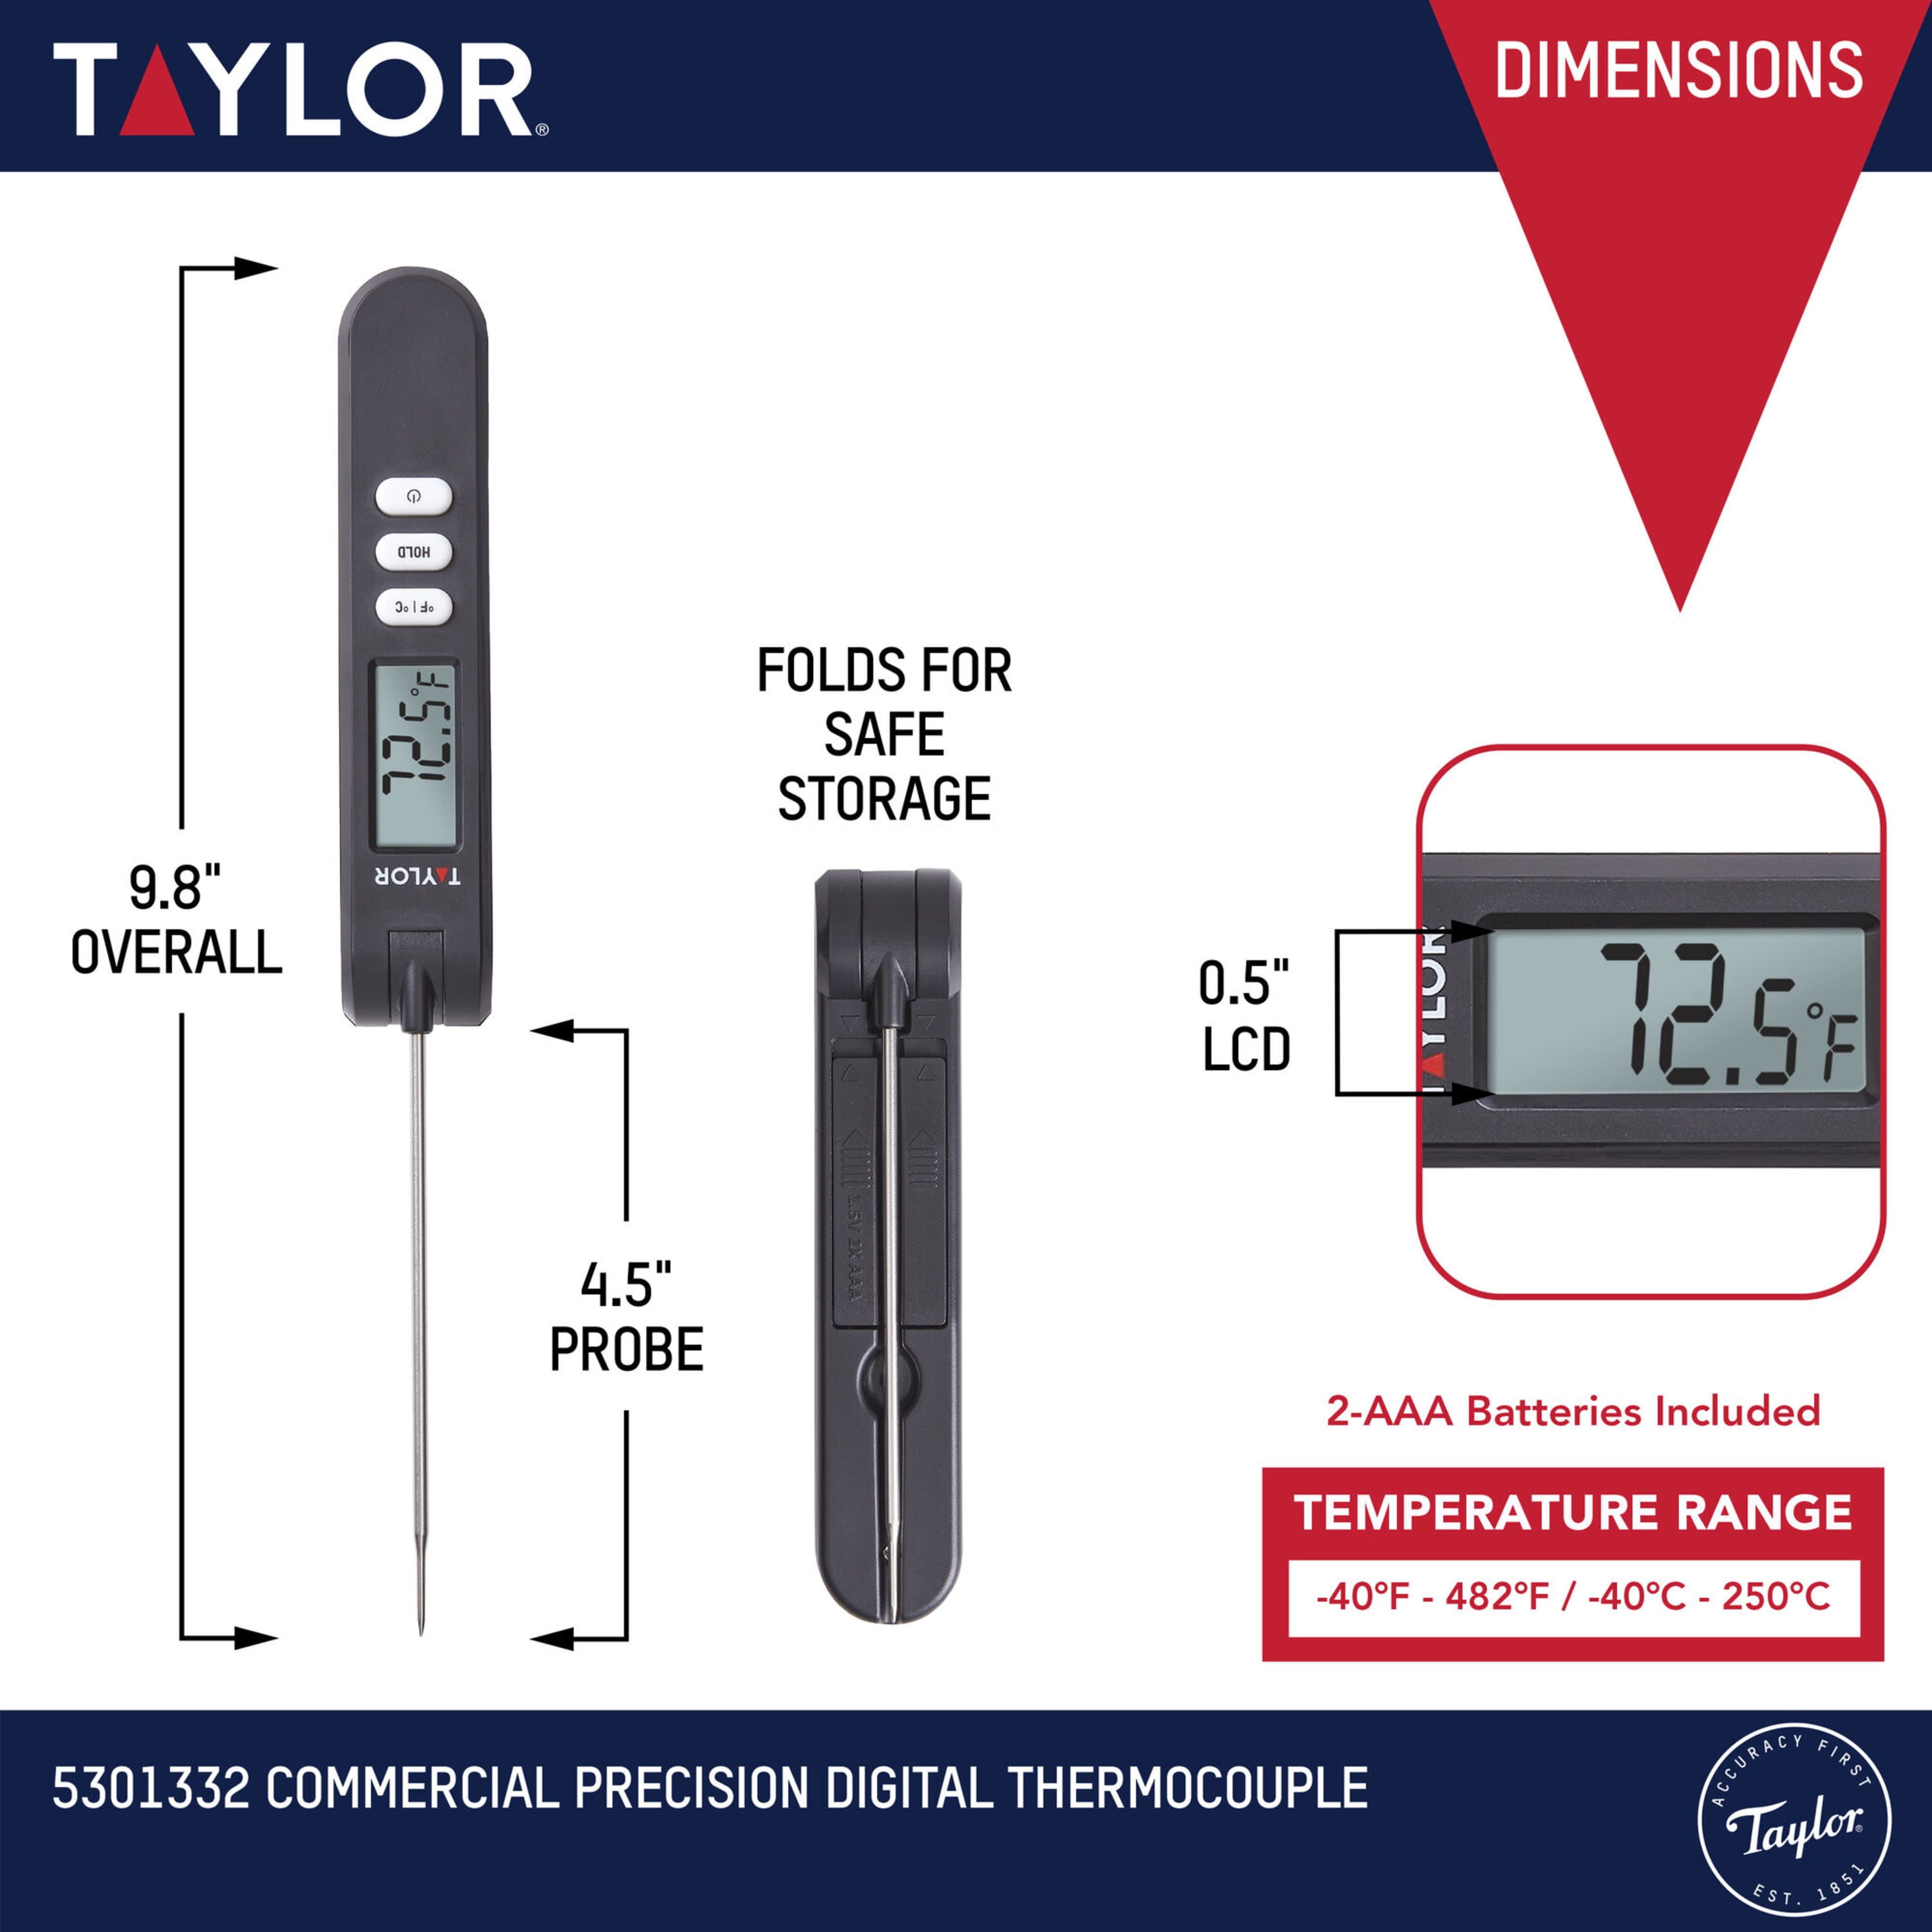 Taylor 214621J Dishwasher Thermometer w/ Plastic Armor Case, 0 to 220F